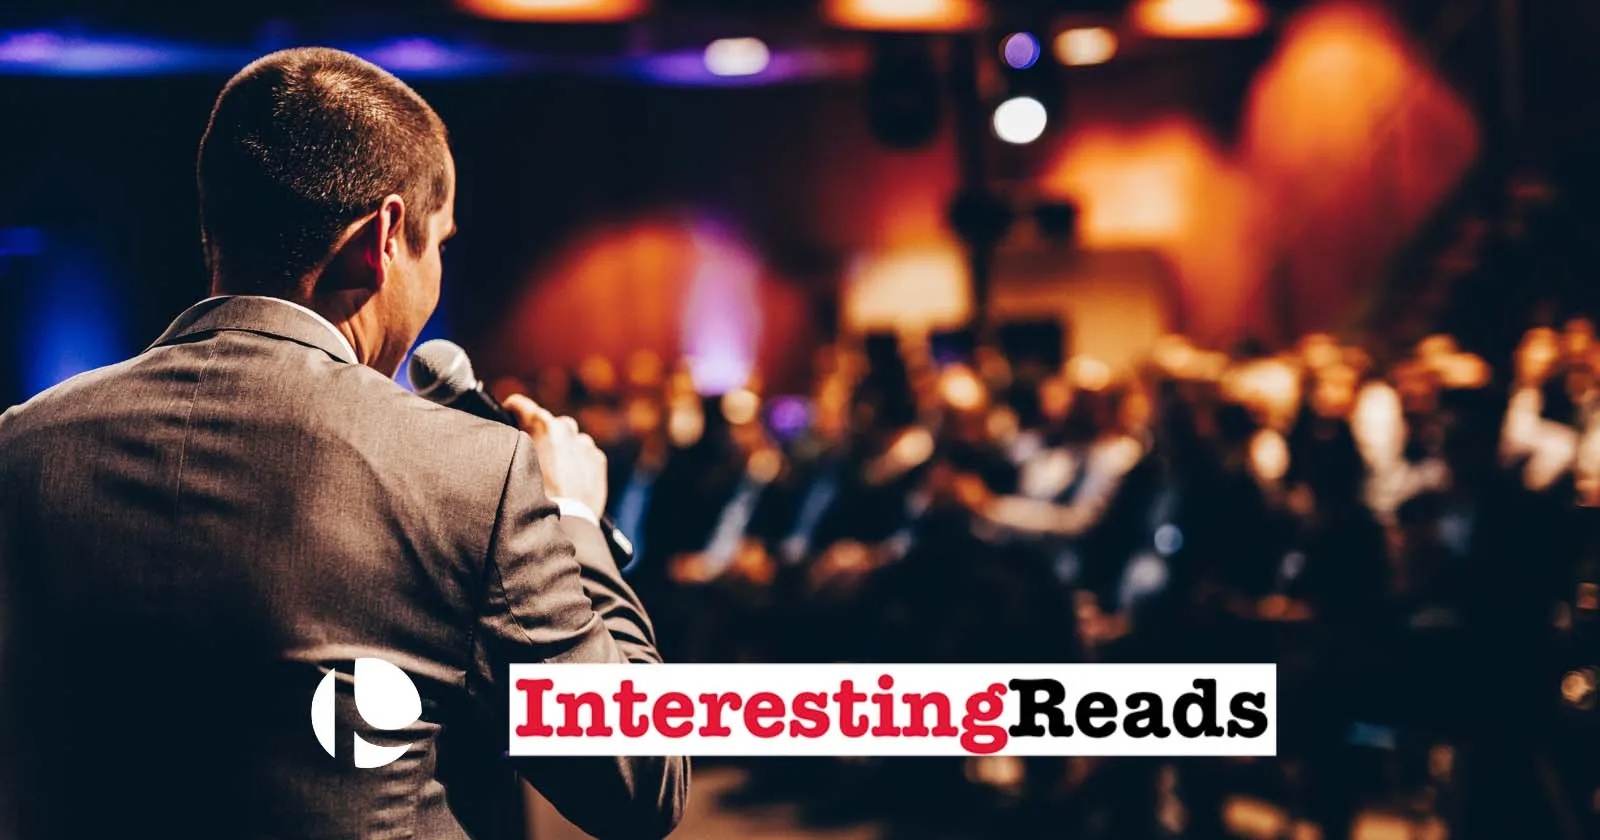 Interesting Reads: Driving Your Brand Ahead With Event Marketing